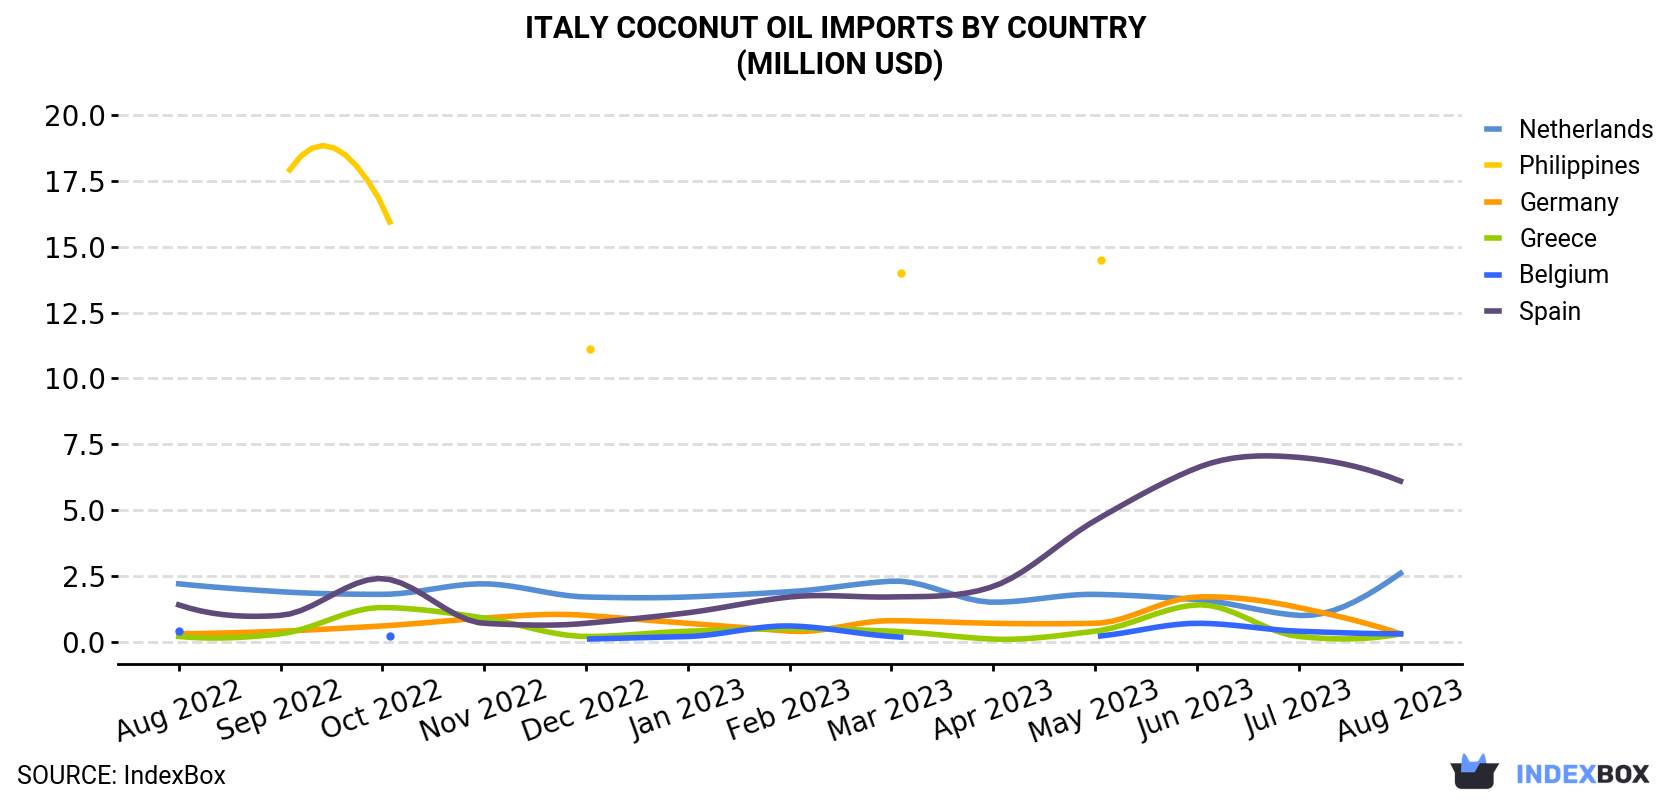 Italy Coconut Oil Imports By Country (Million USD)